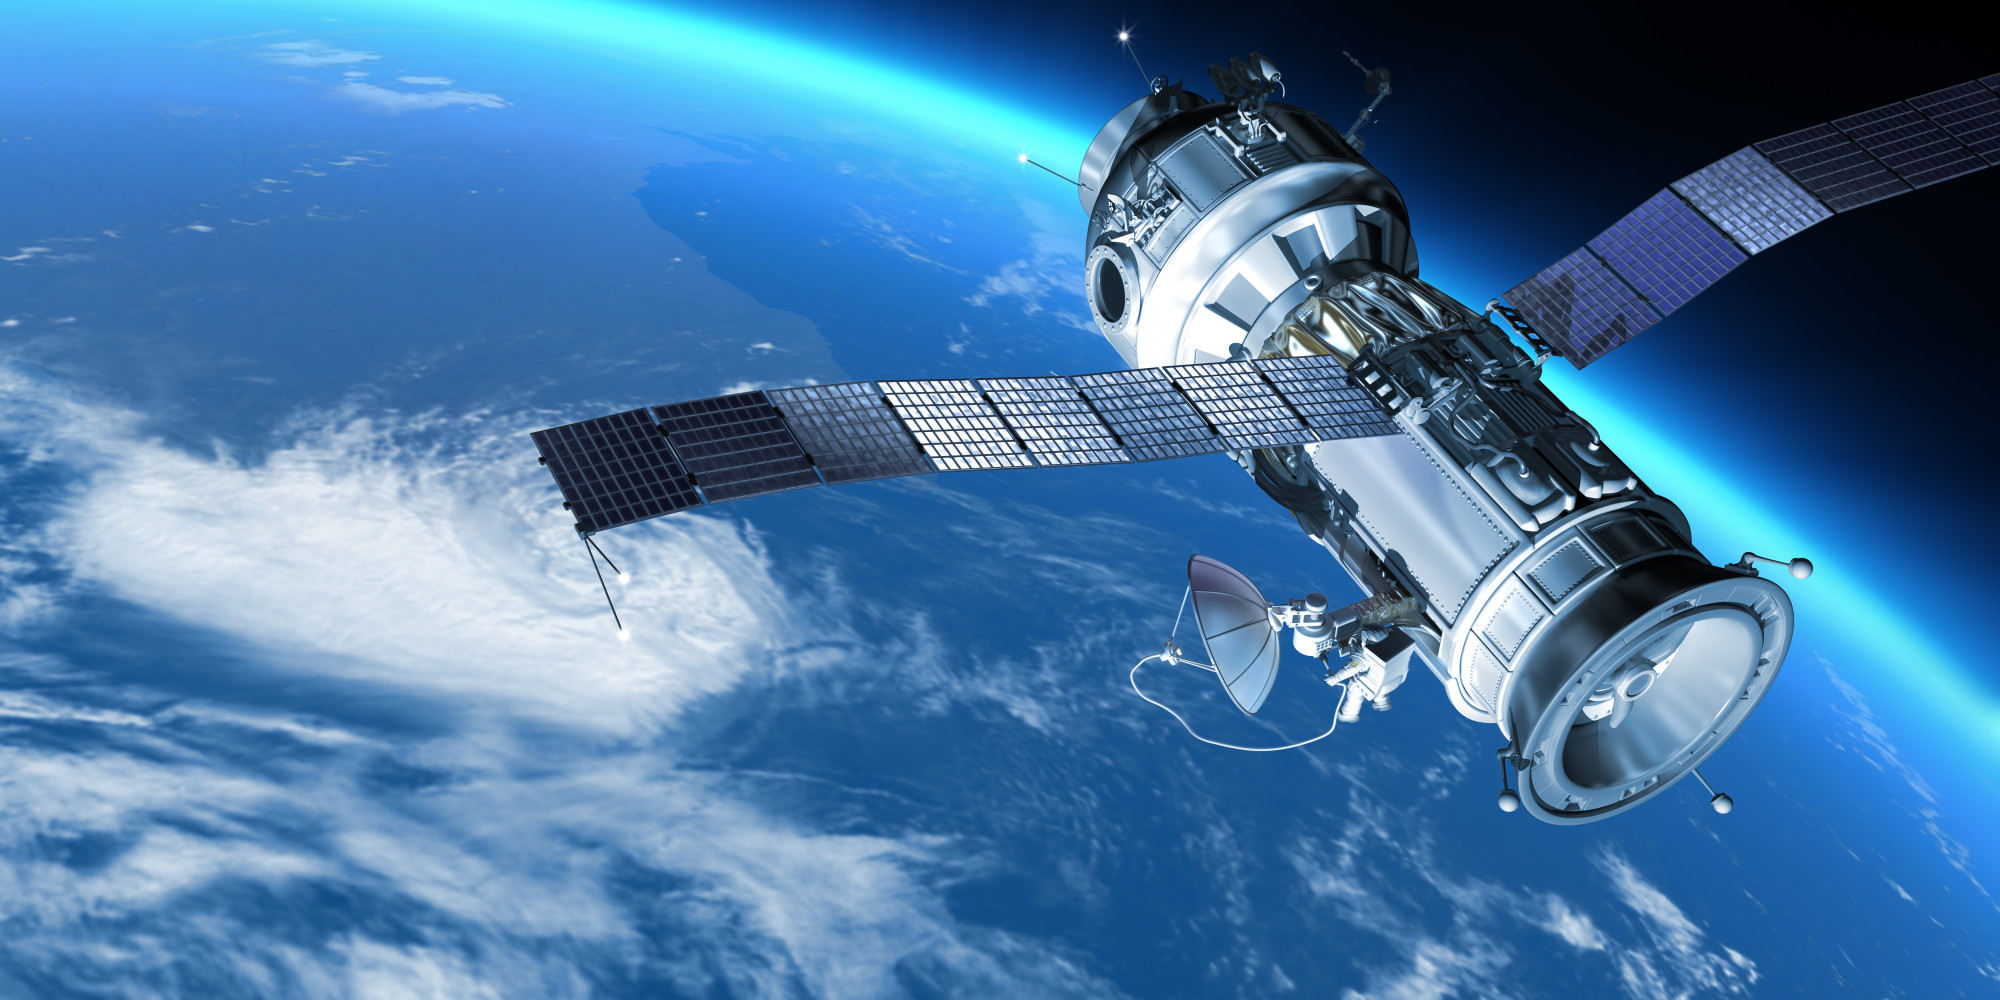 Uganda Launches Pearl AfricaSat-1 Into Space